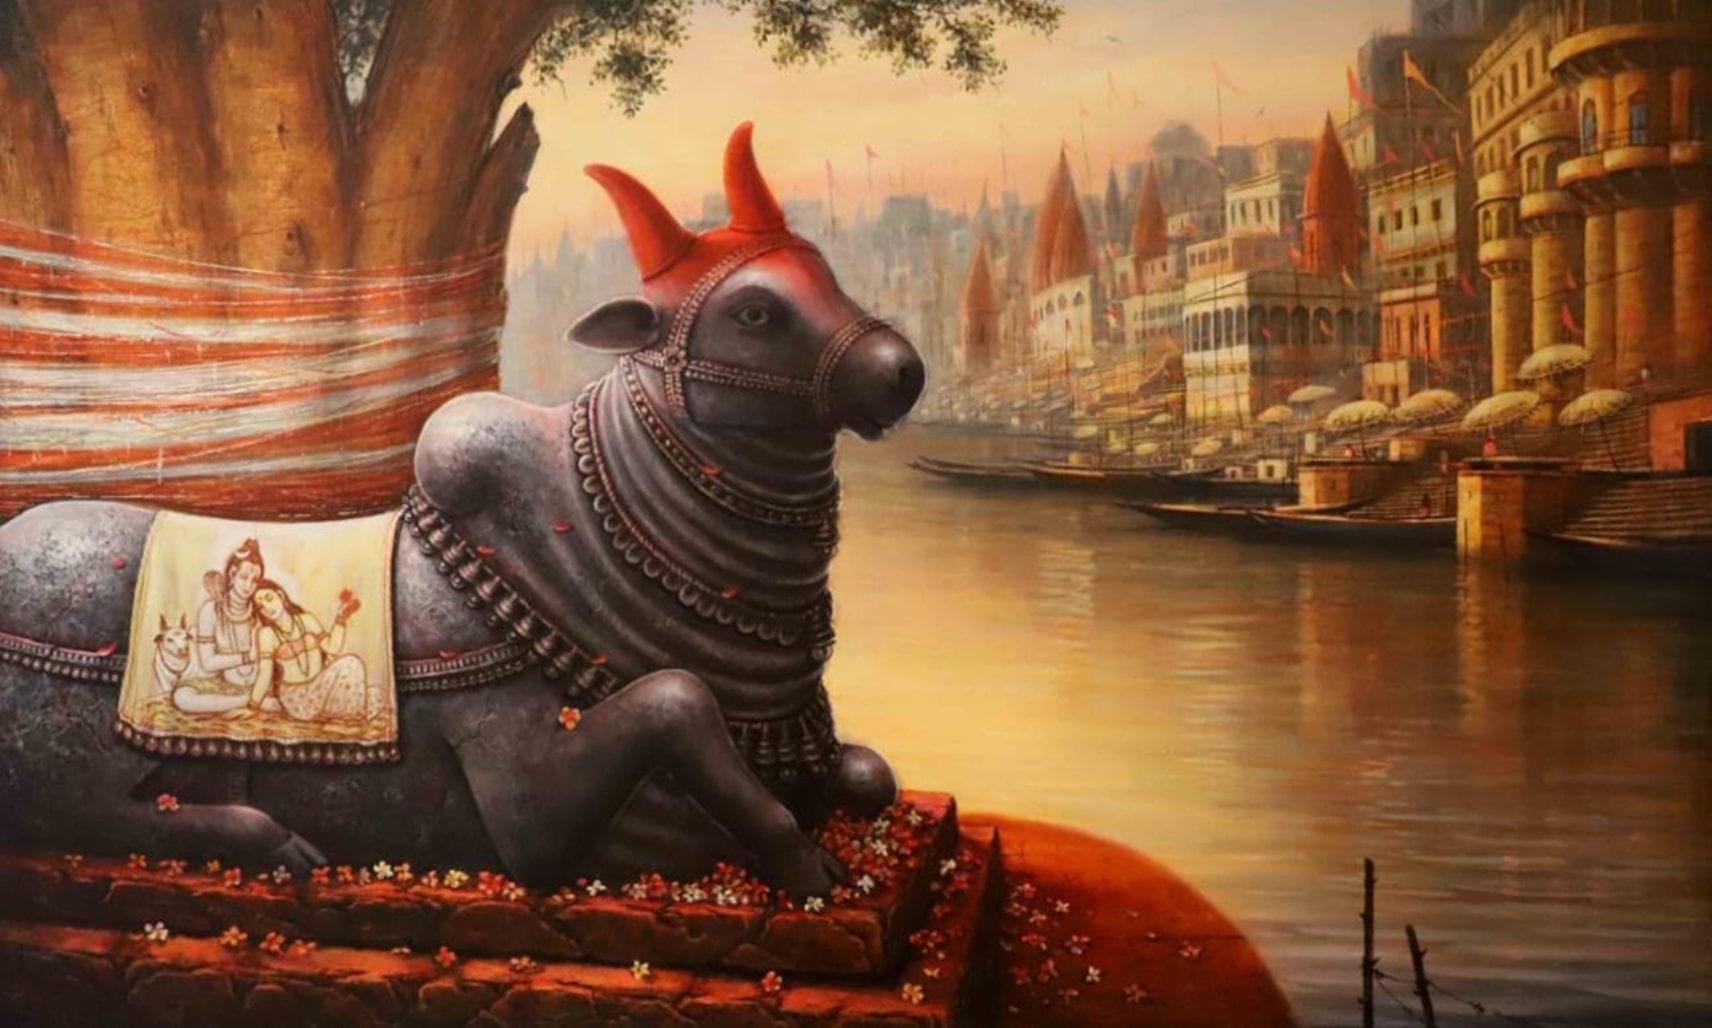 Paramesh Paul Interior Painting - Nandi, Acrylic on Canvas by Contemporary Indian Artist "In Stock"